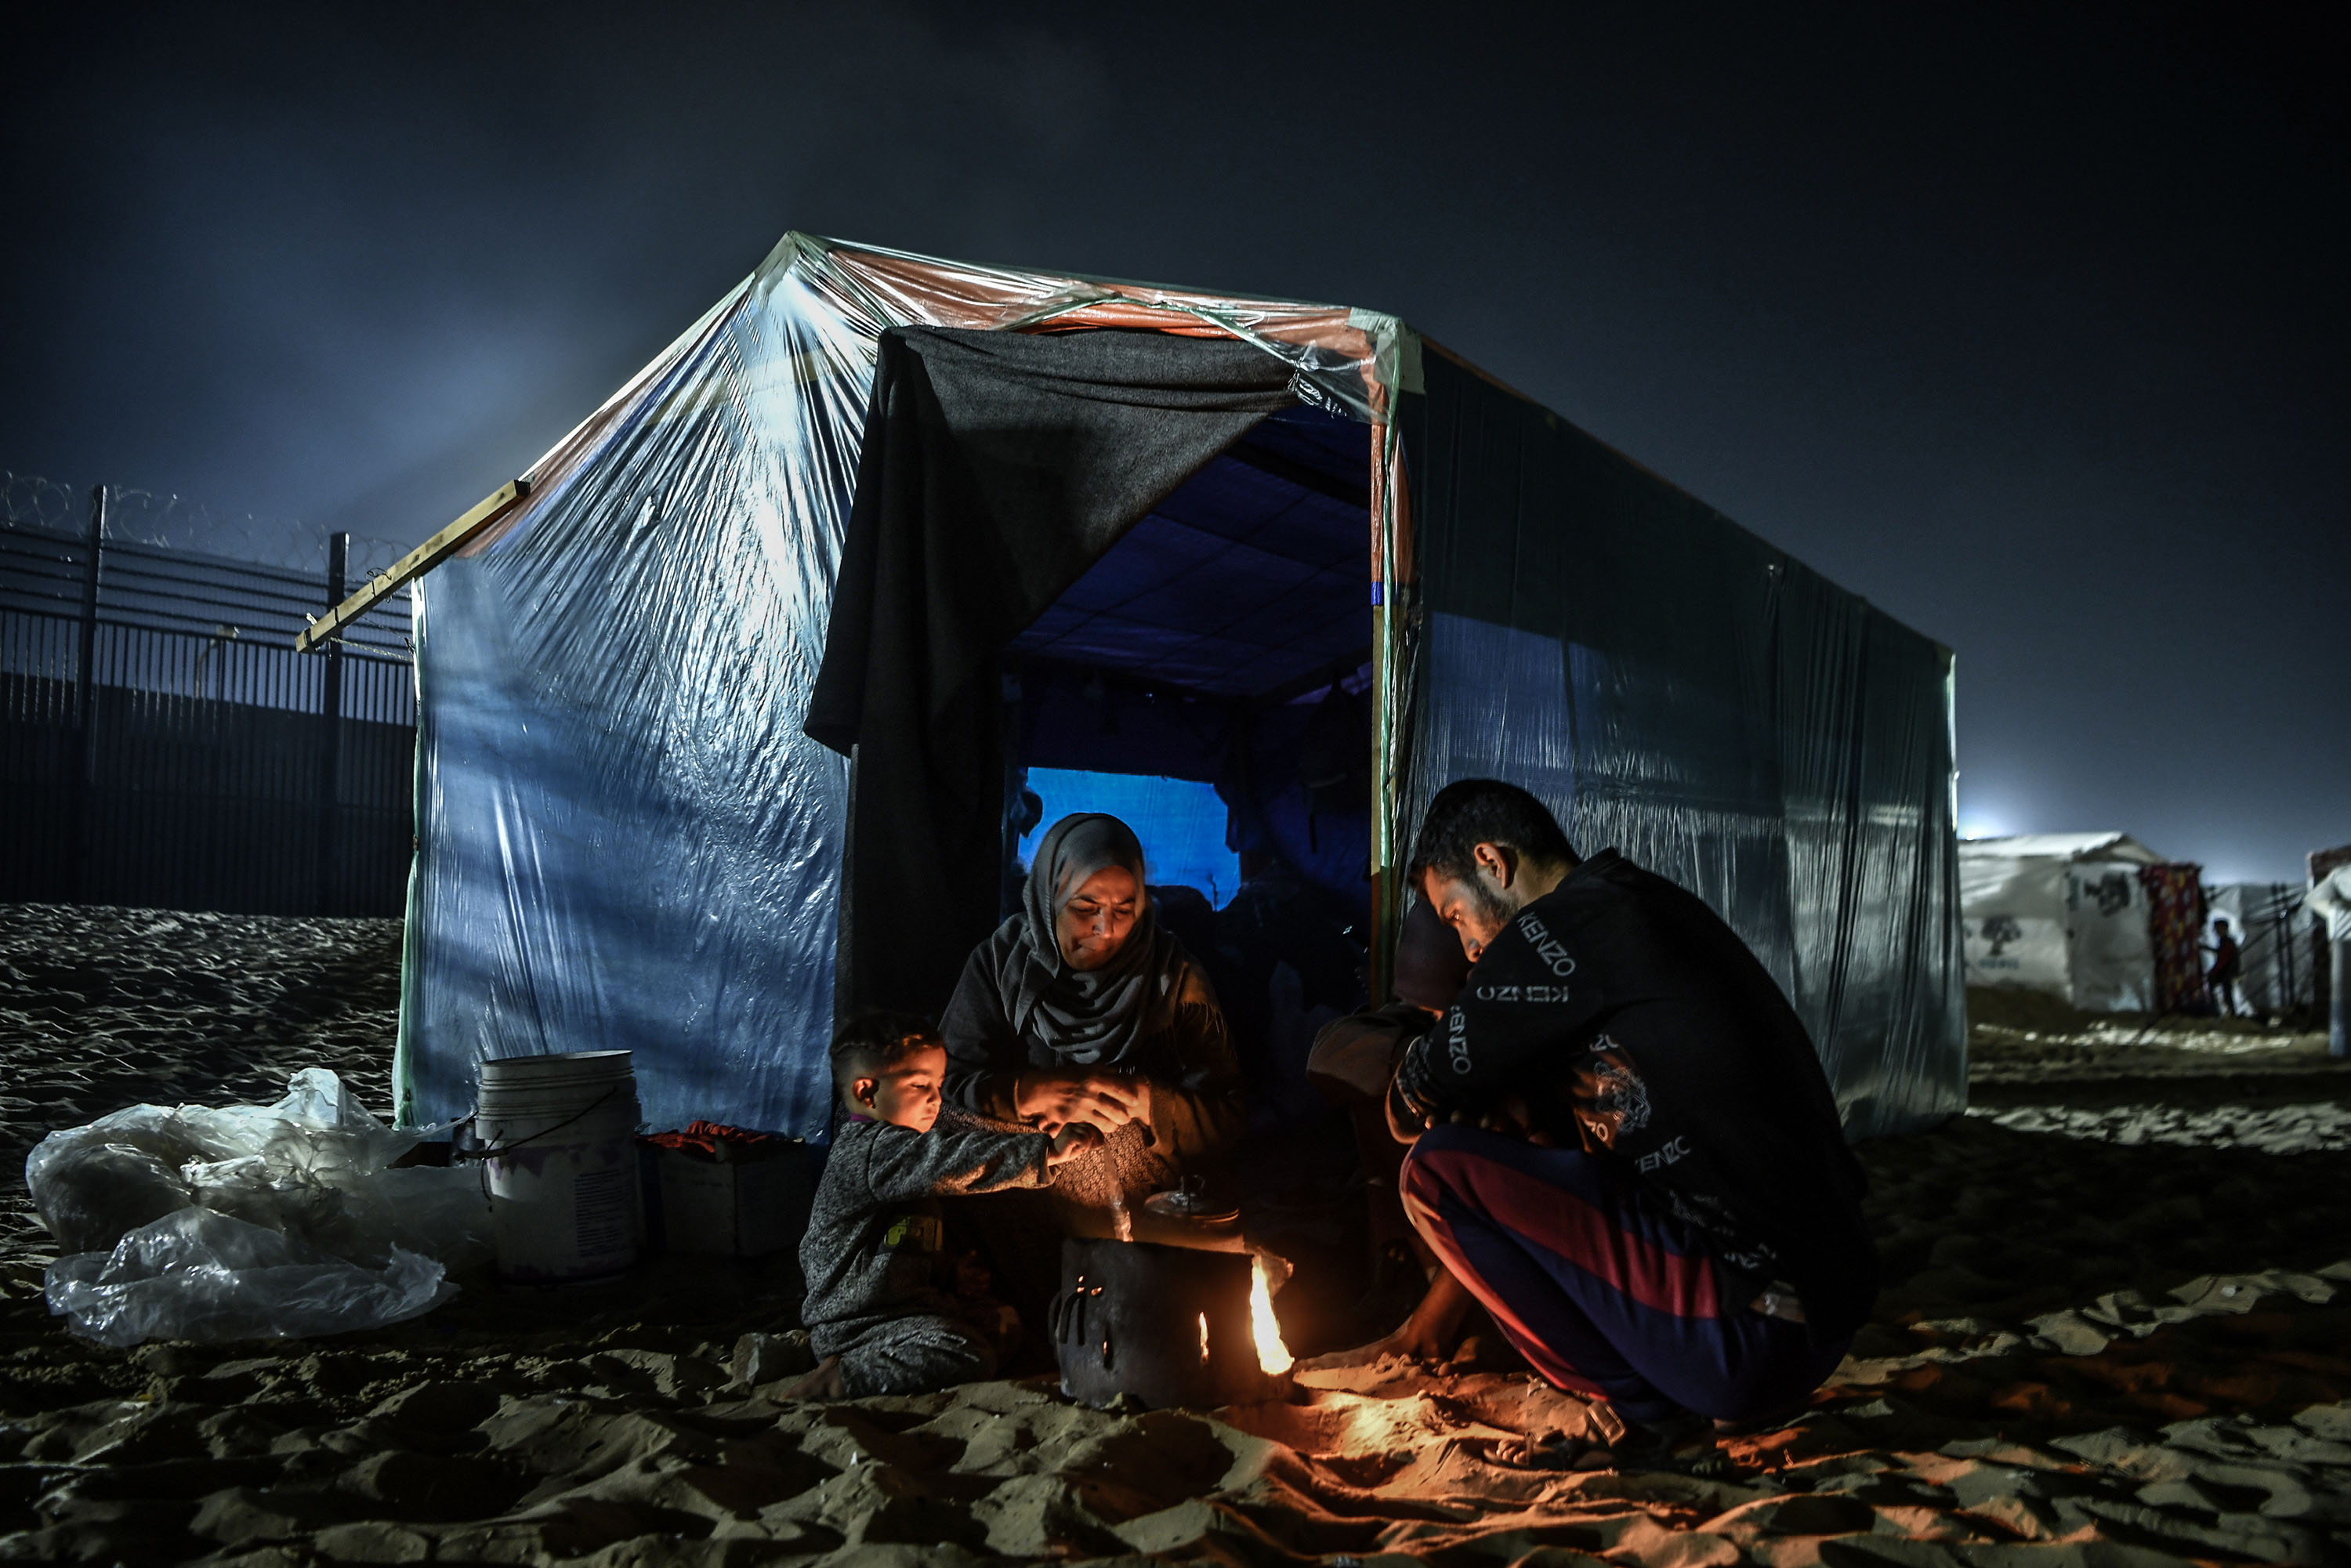 Members of a Palestinian family warm themselves beside a campfire and makeshift tent, near the Egyptian border in Rafah, Gaza, on February 27.